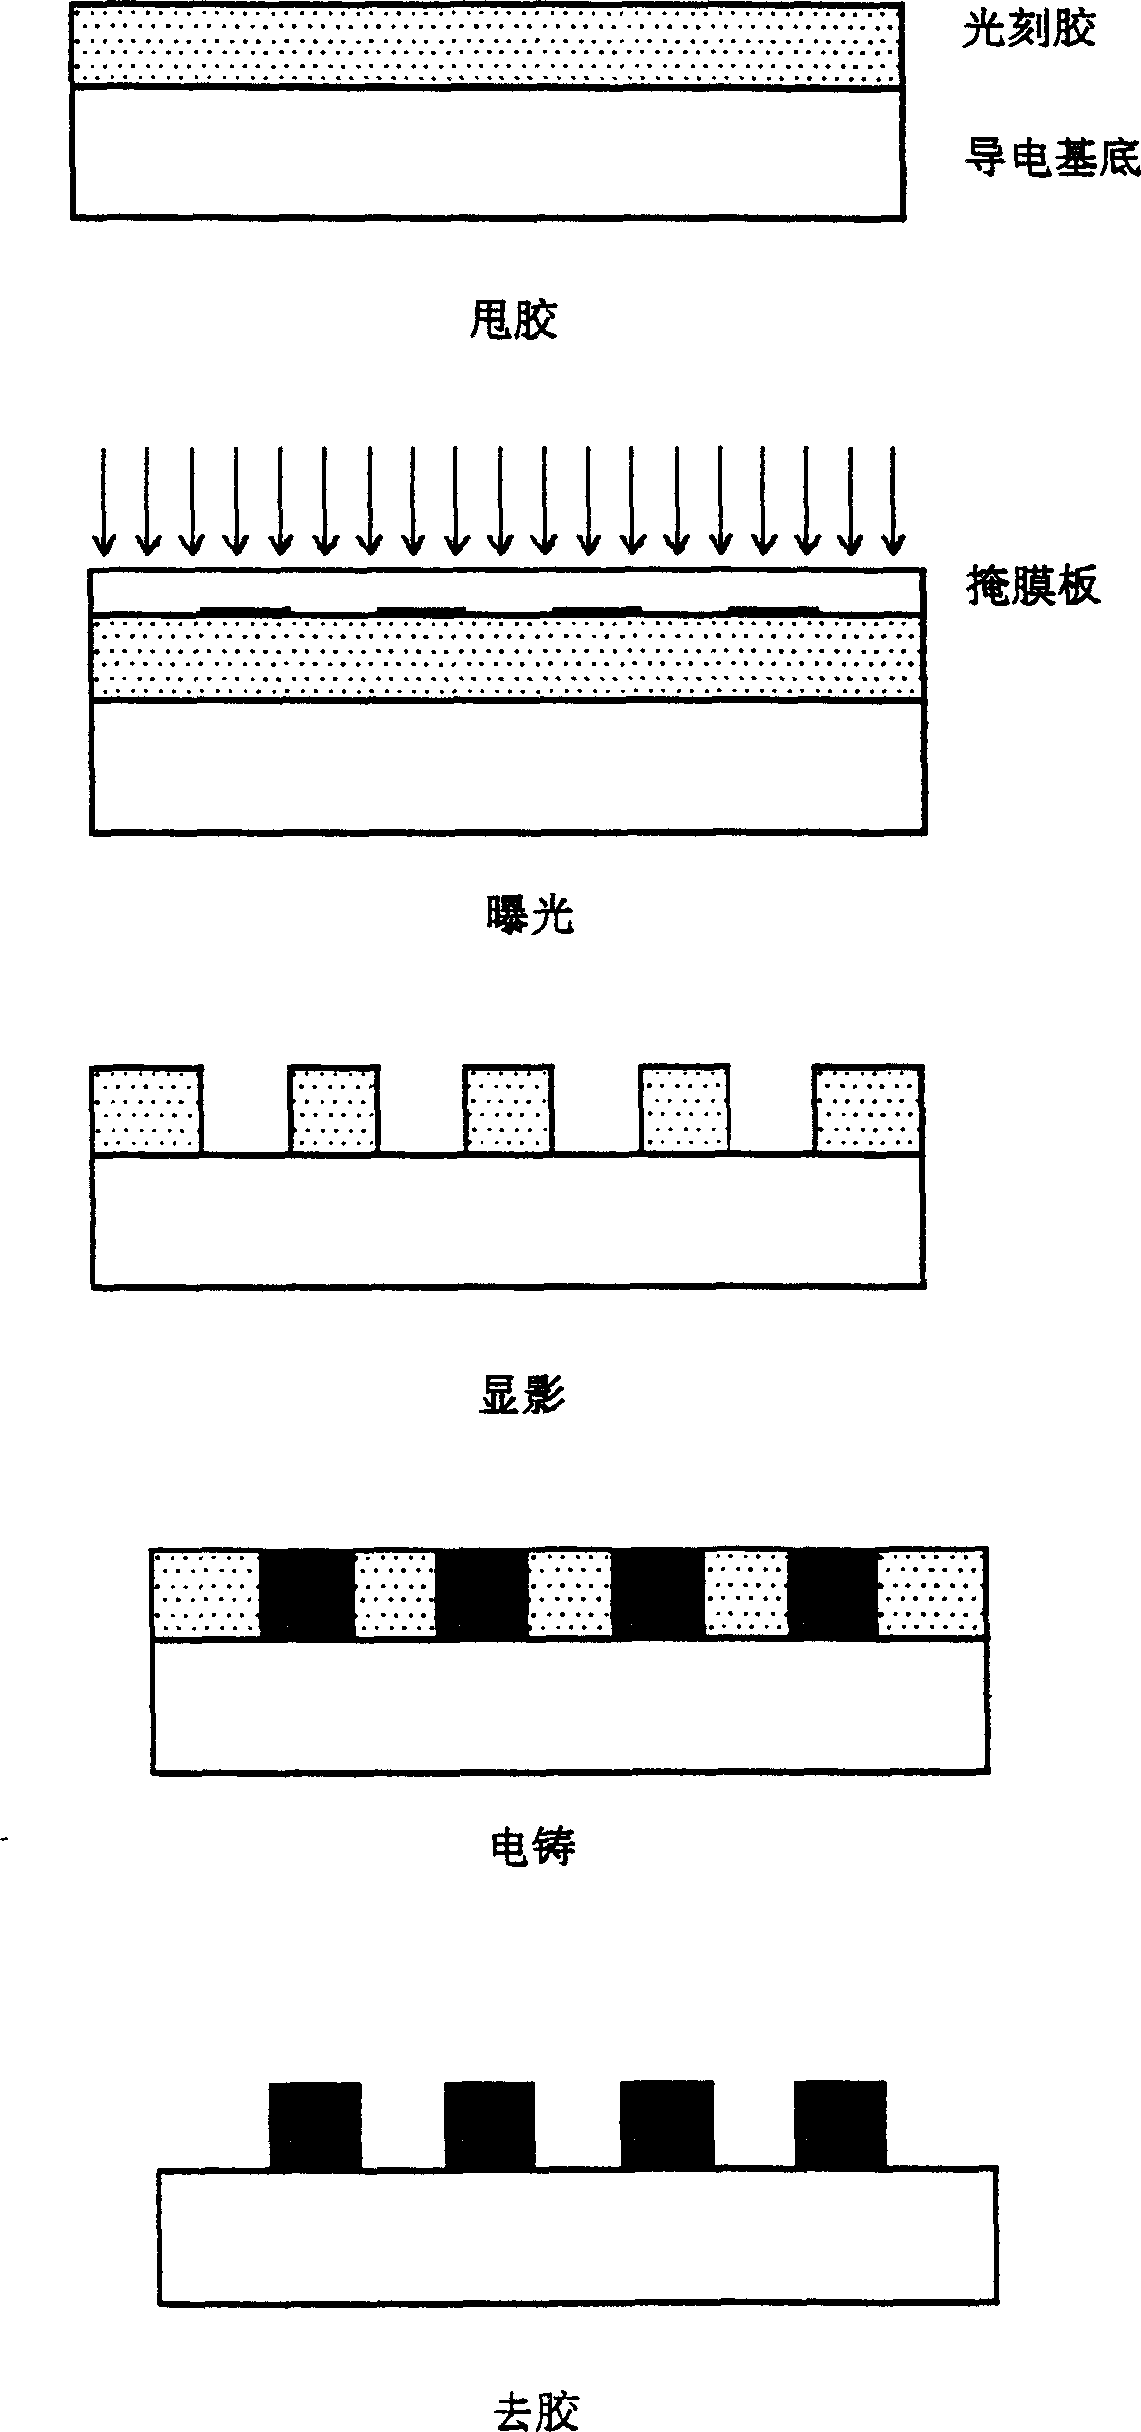 Process method of pore based on photolithograph